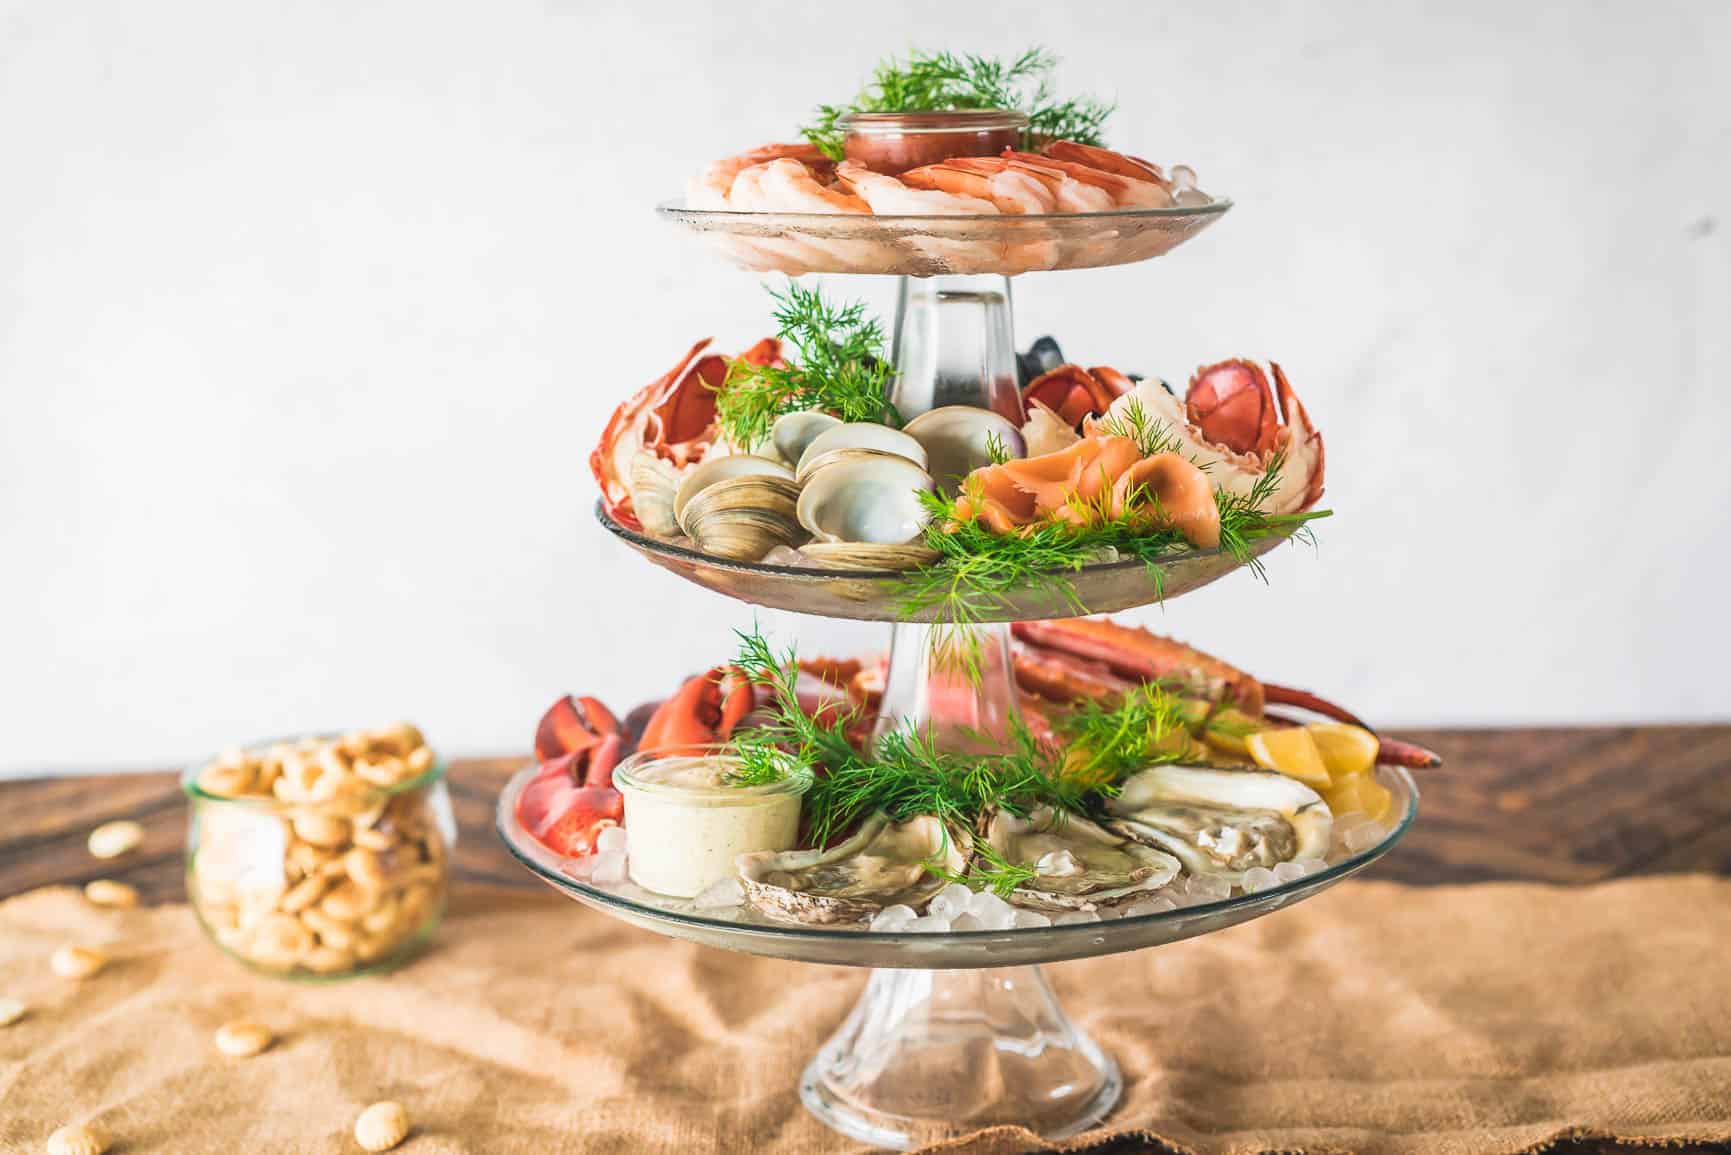 How to make a Chilled Seafood Tower